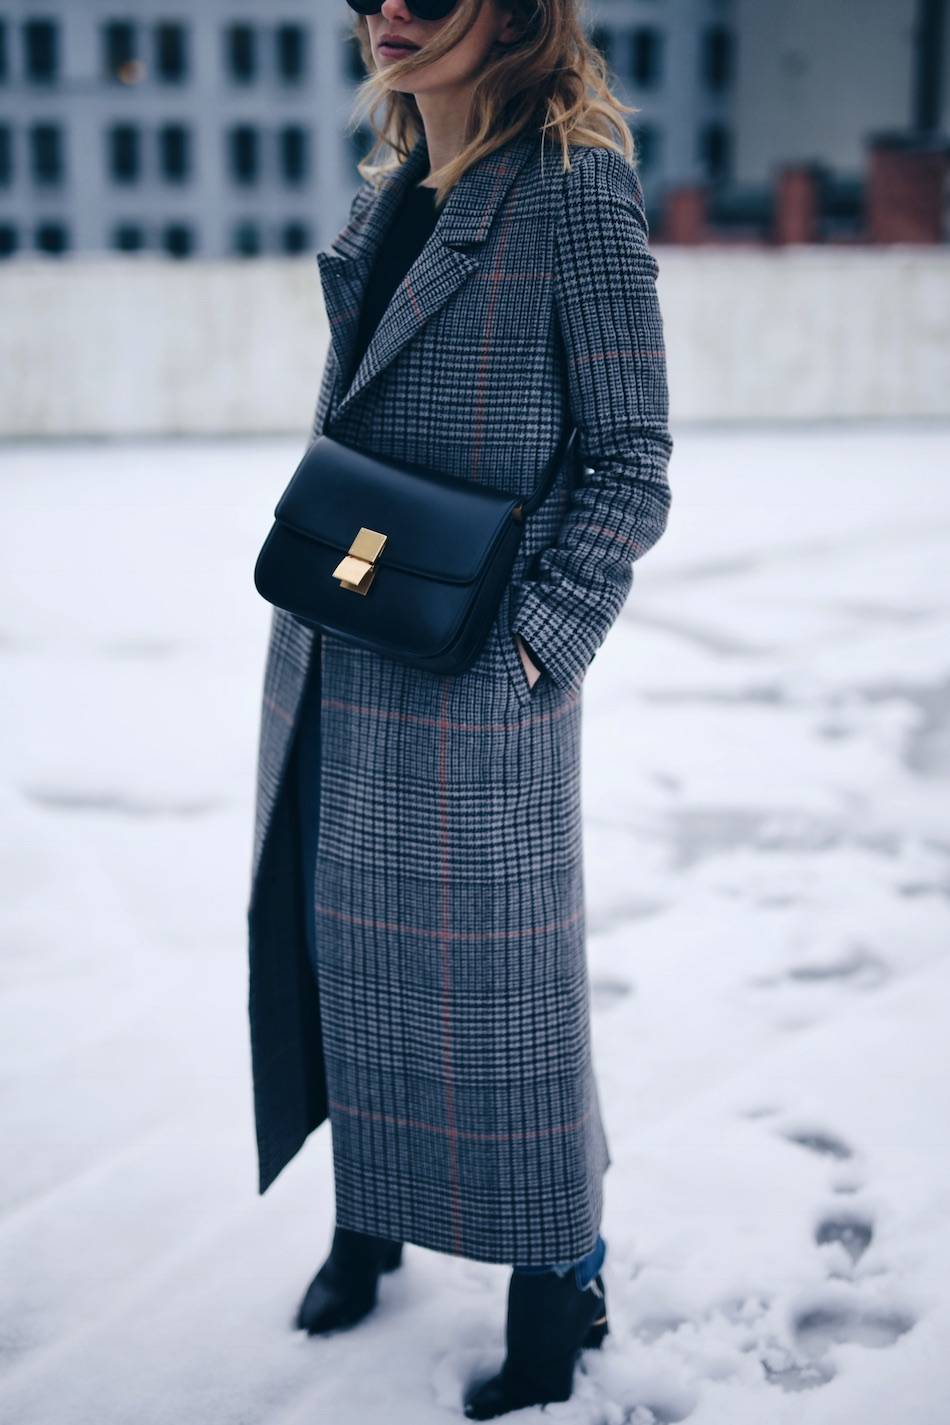 Style and beauty blogger Jill Lansky of The August Diaries shows winter chic style in H&M plaid coat with Celine black box bag